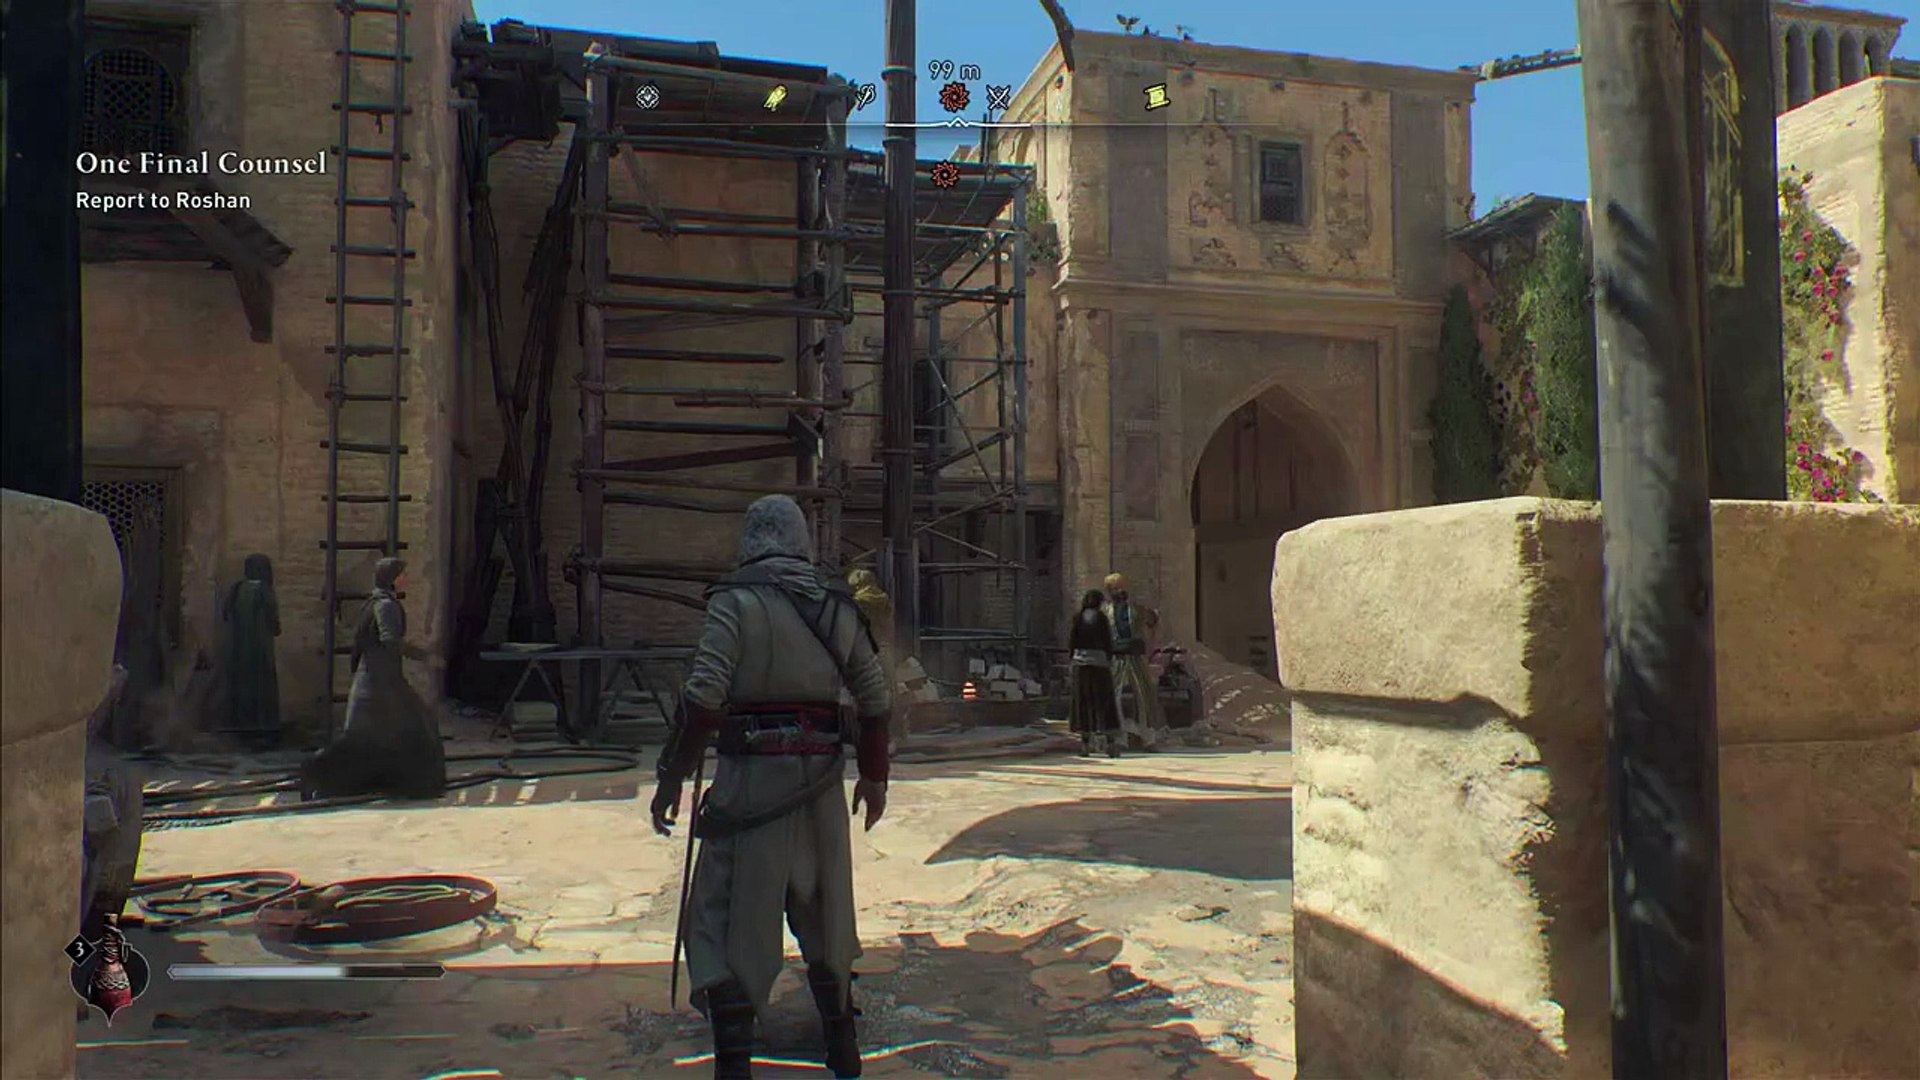 Assassin's Creed Valhalla - Gameplay Xbox Series X - Video Dailymotion